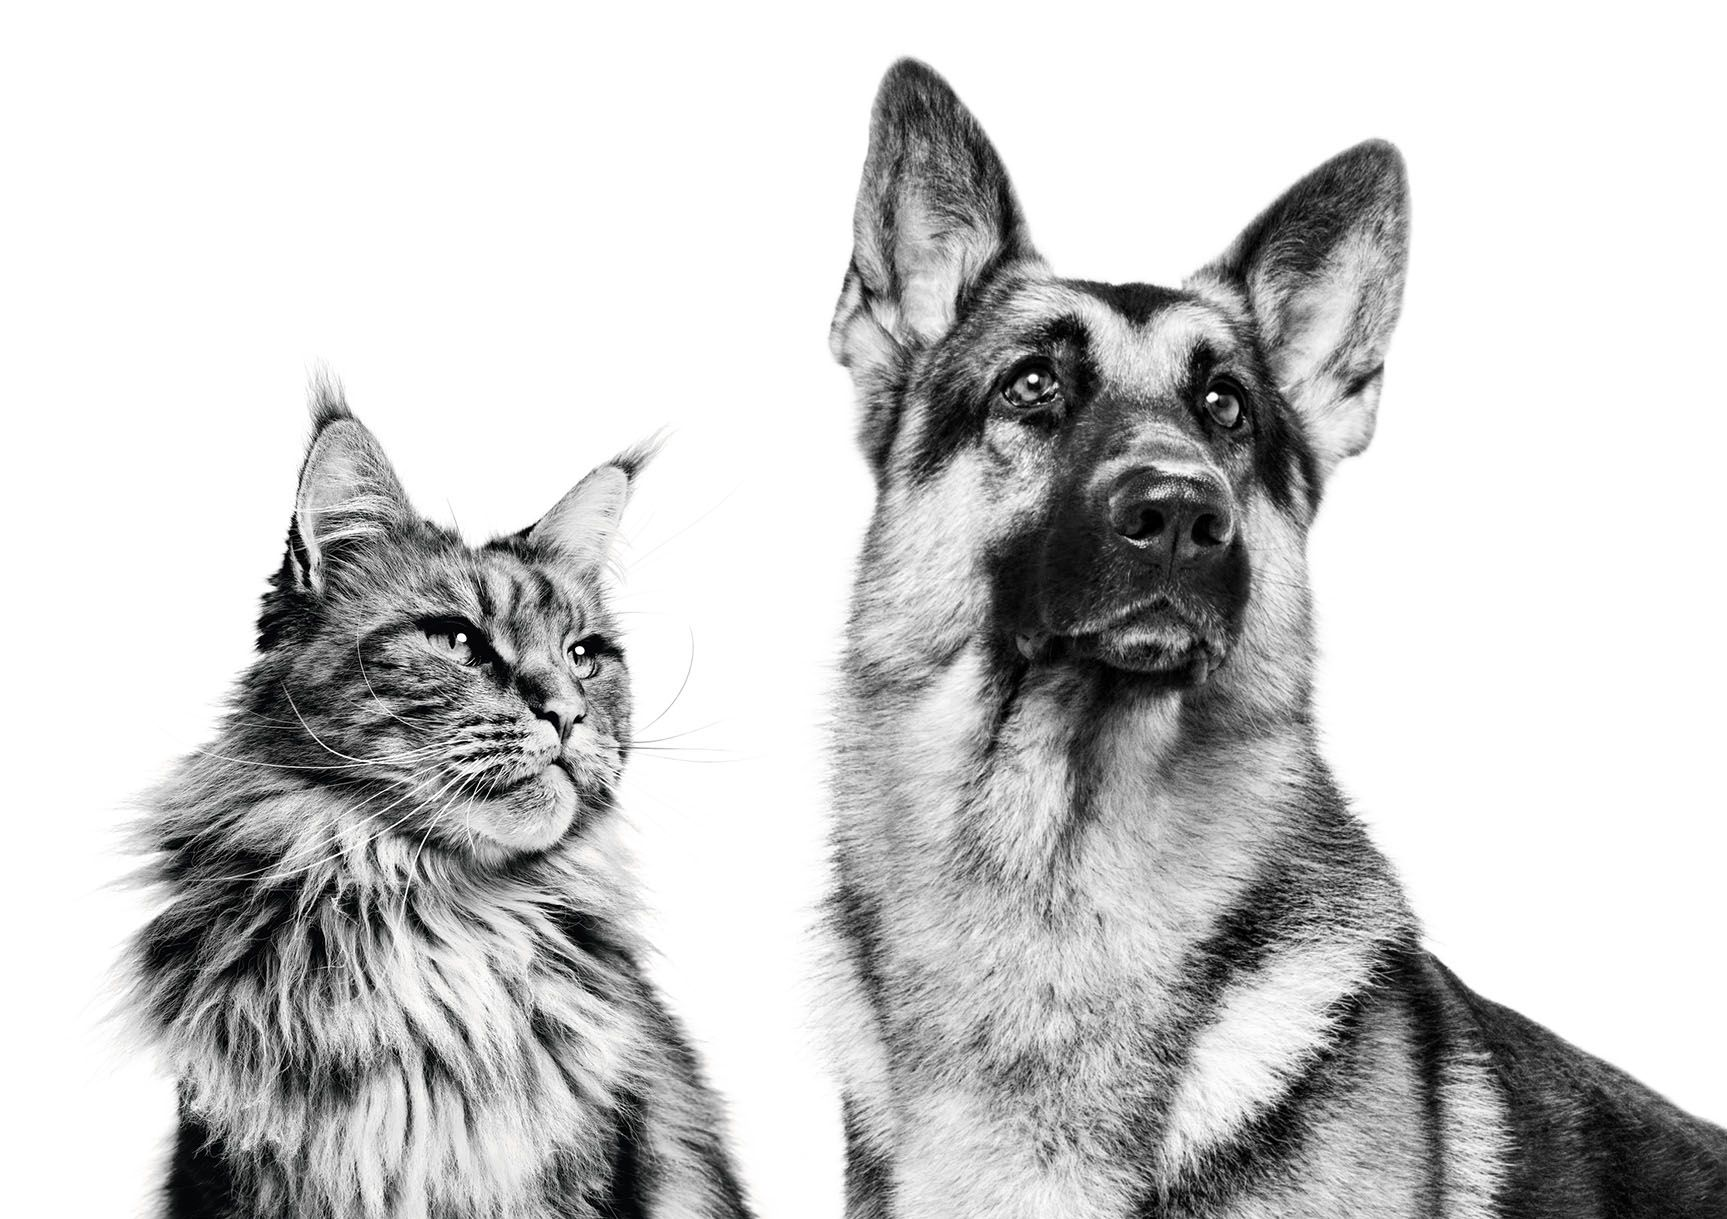 Maine Coon and German Shepherd adults standing in black and white on a white background